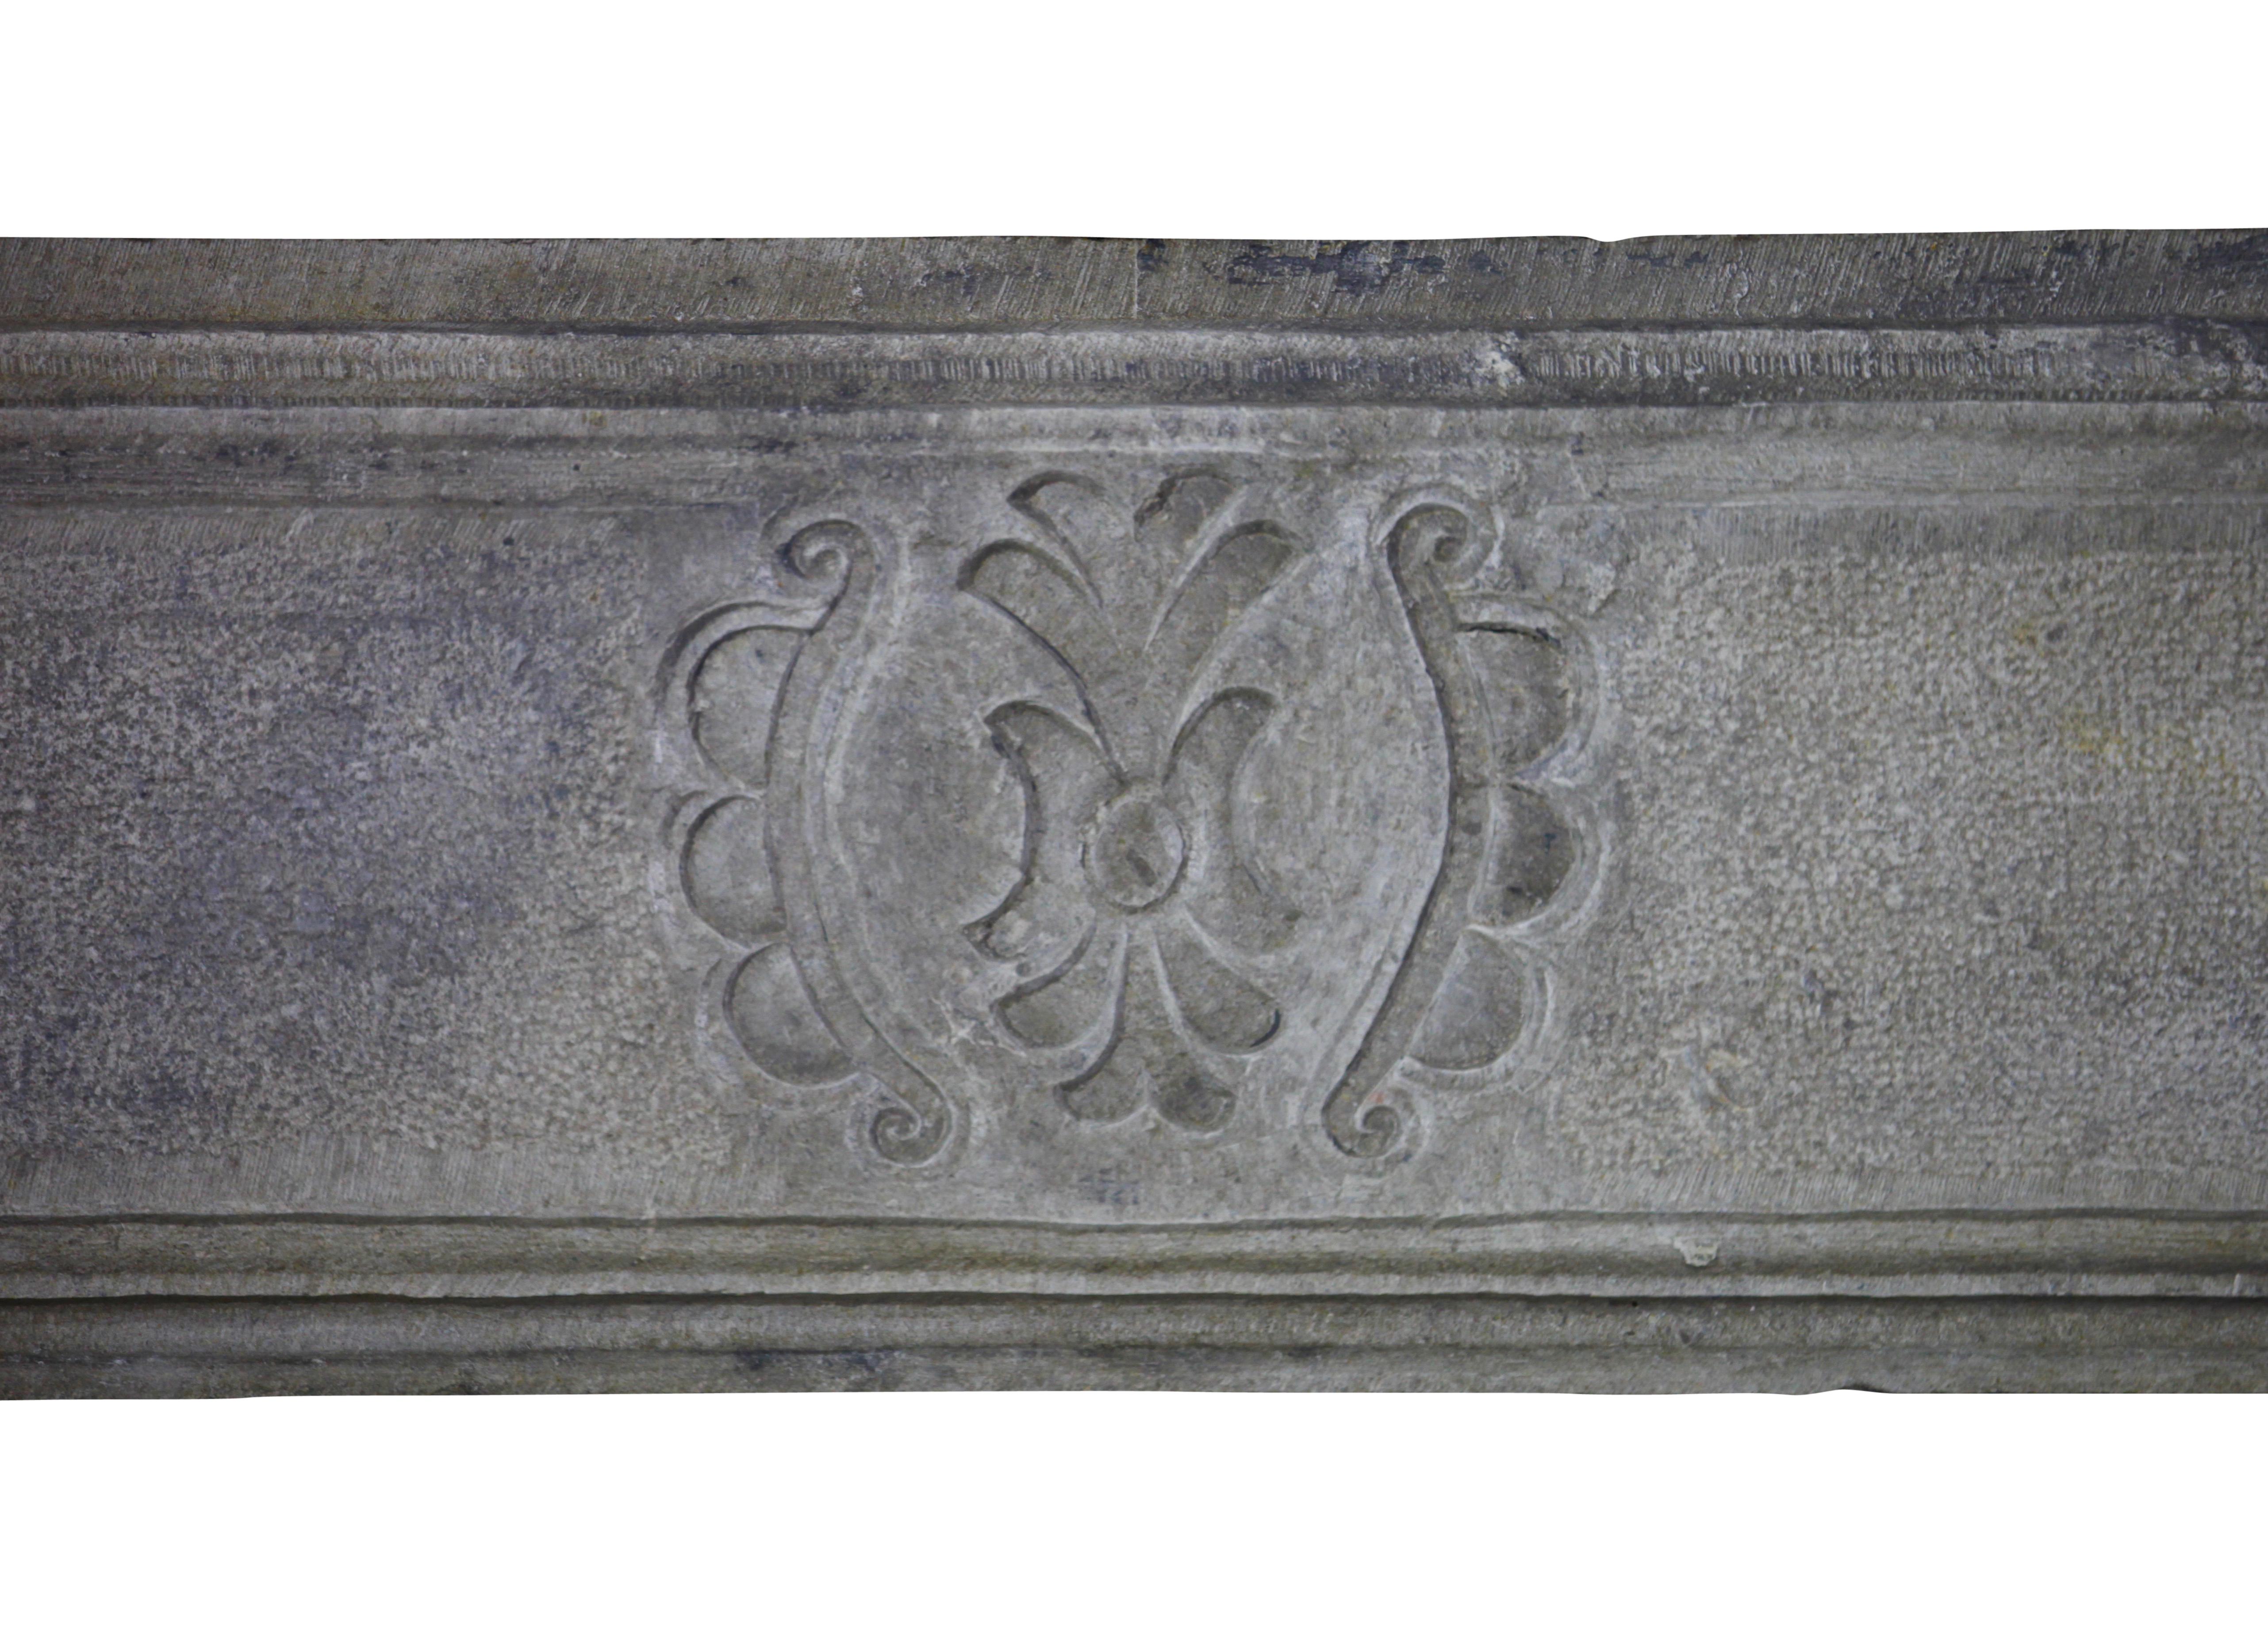 This French Campagnard grey marble hard stone fireplace surround is from the early 17 century. The proportions are exquisite. Large front and slow moving jambs. It is unique to see the shine and reflection of the stone as well as the carving